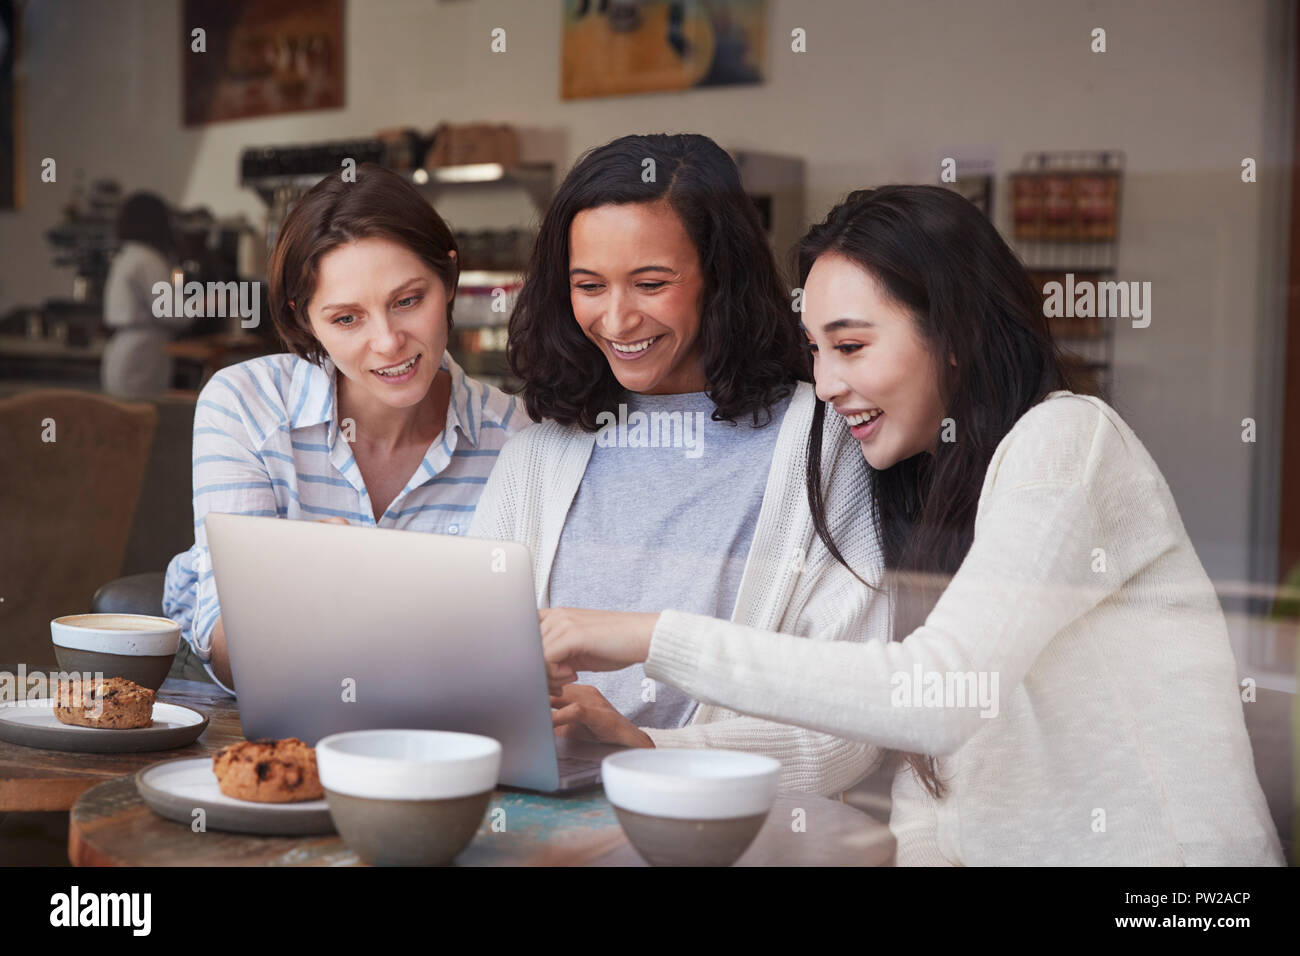 Female friends looking at a laptop together at a coffee shop Stock Photo